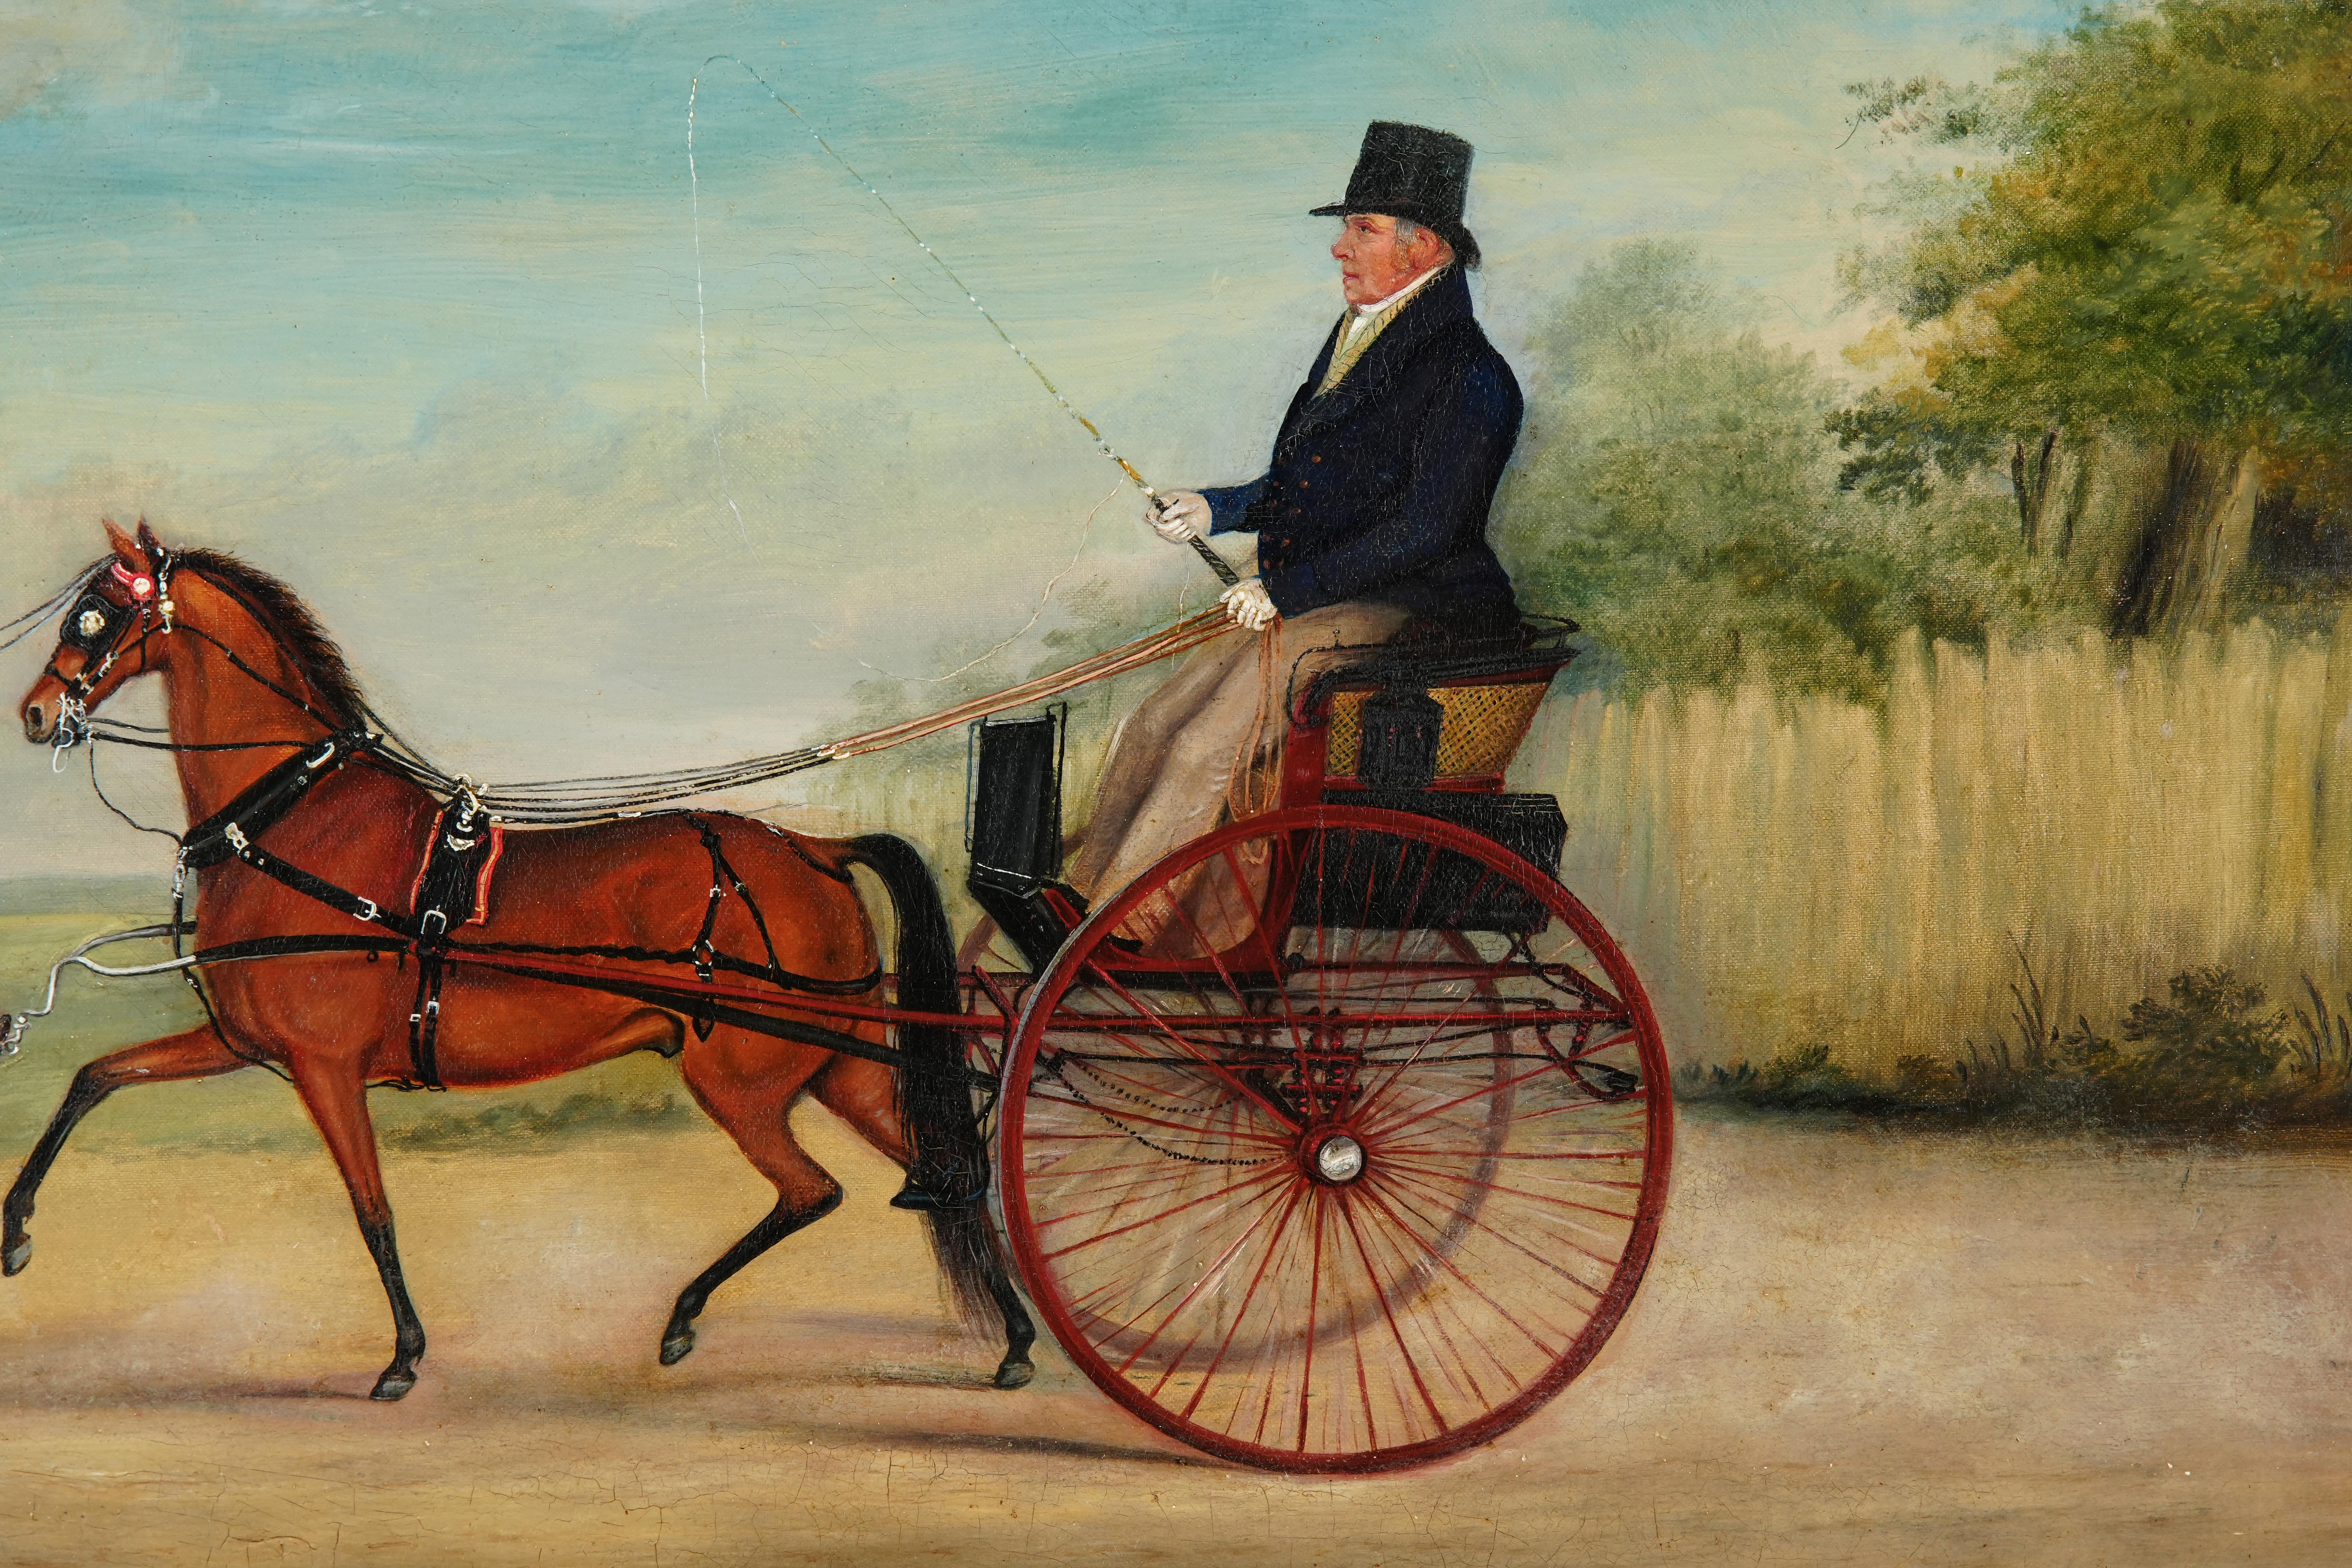 horse & carriage/gig , country scene, antique oil, by John Vine of Colchester - Old Masters Painting by john vine of colchester